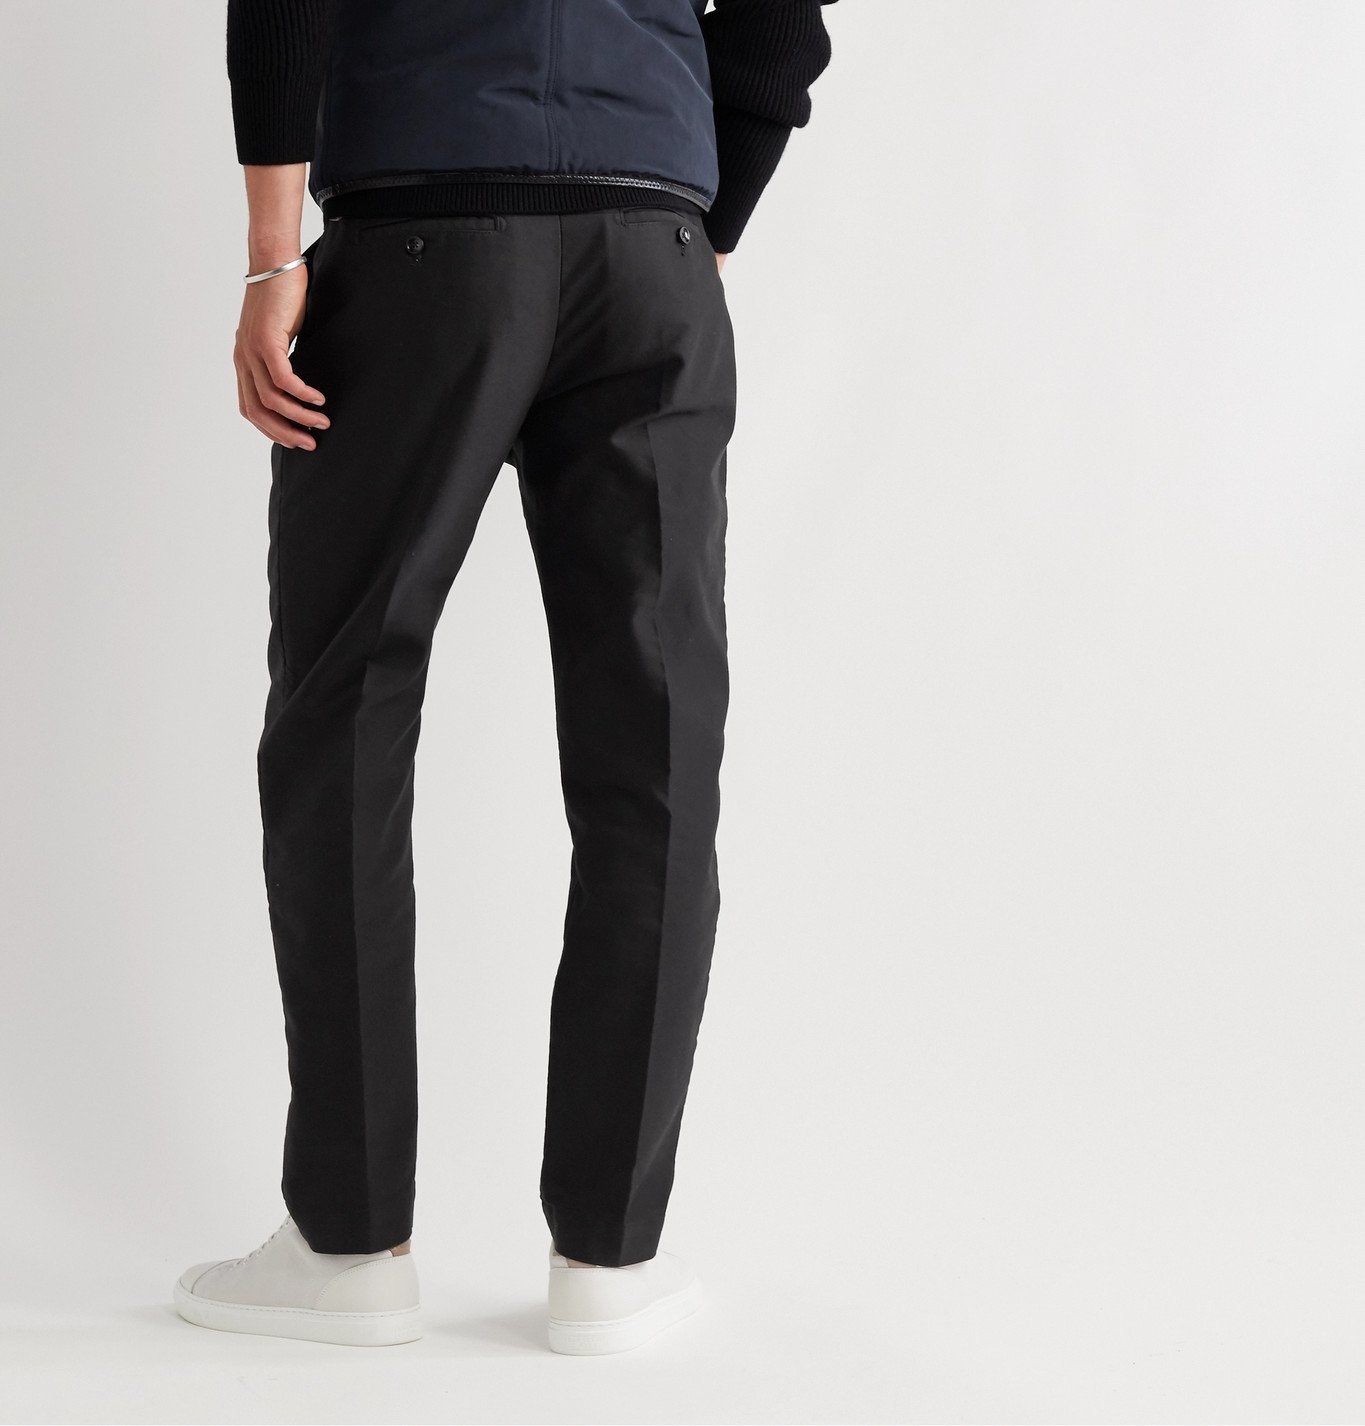 TOM FORD - Cotton-Sateen Trousers - Black TOM FORD